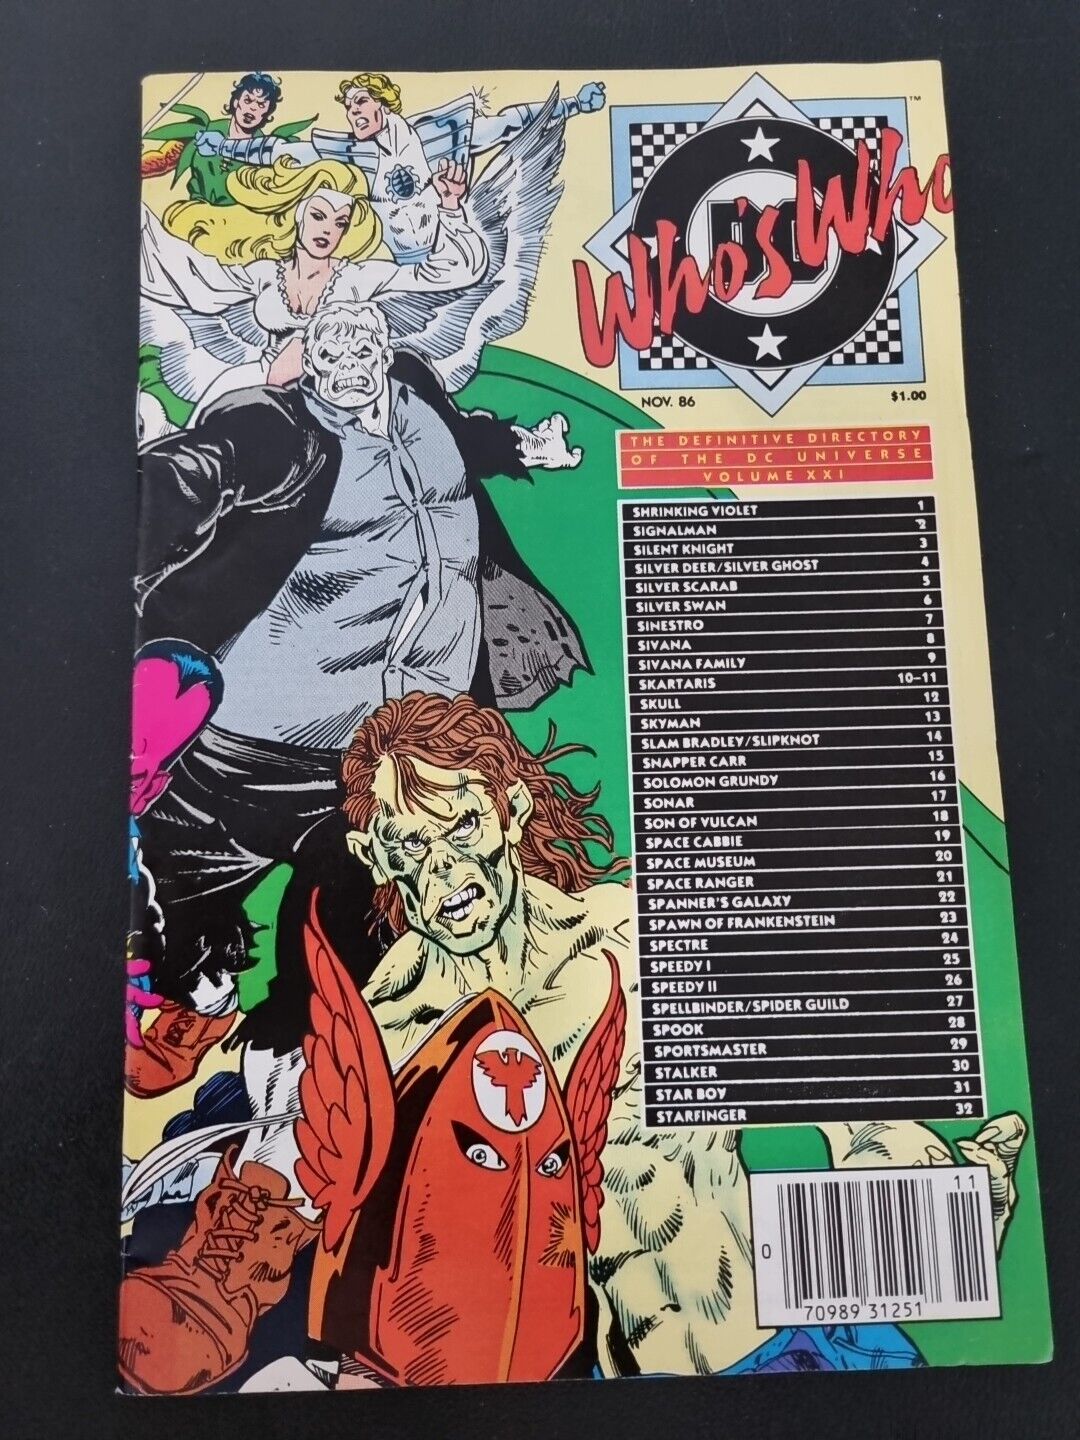 Who's Who: The Definitive Directory of the DC Universe Nov 87 #4